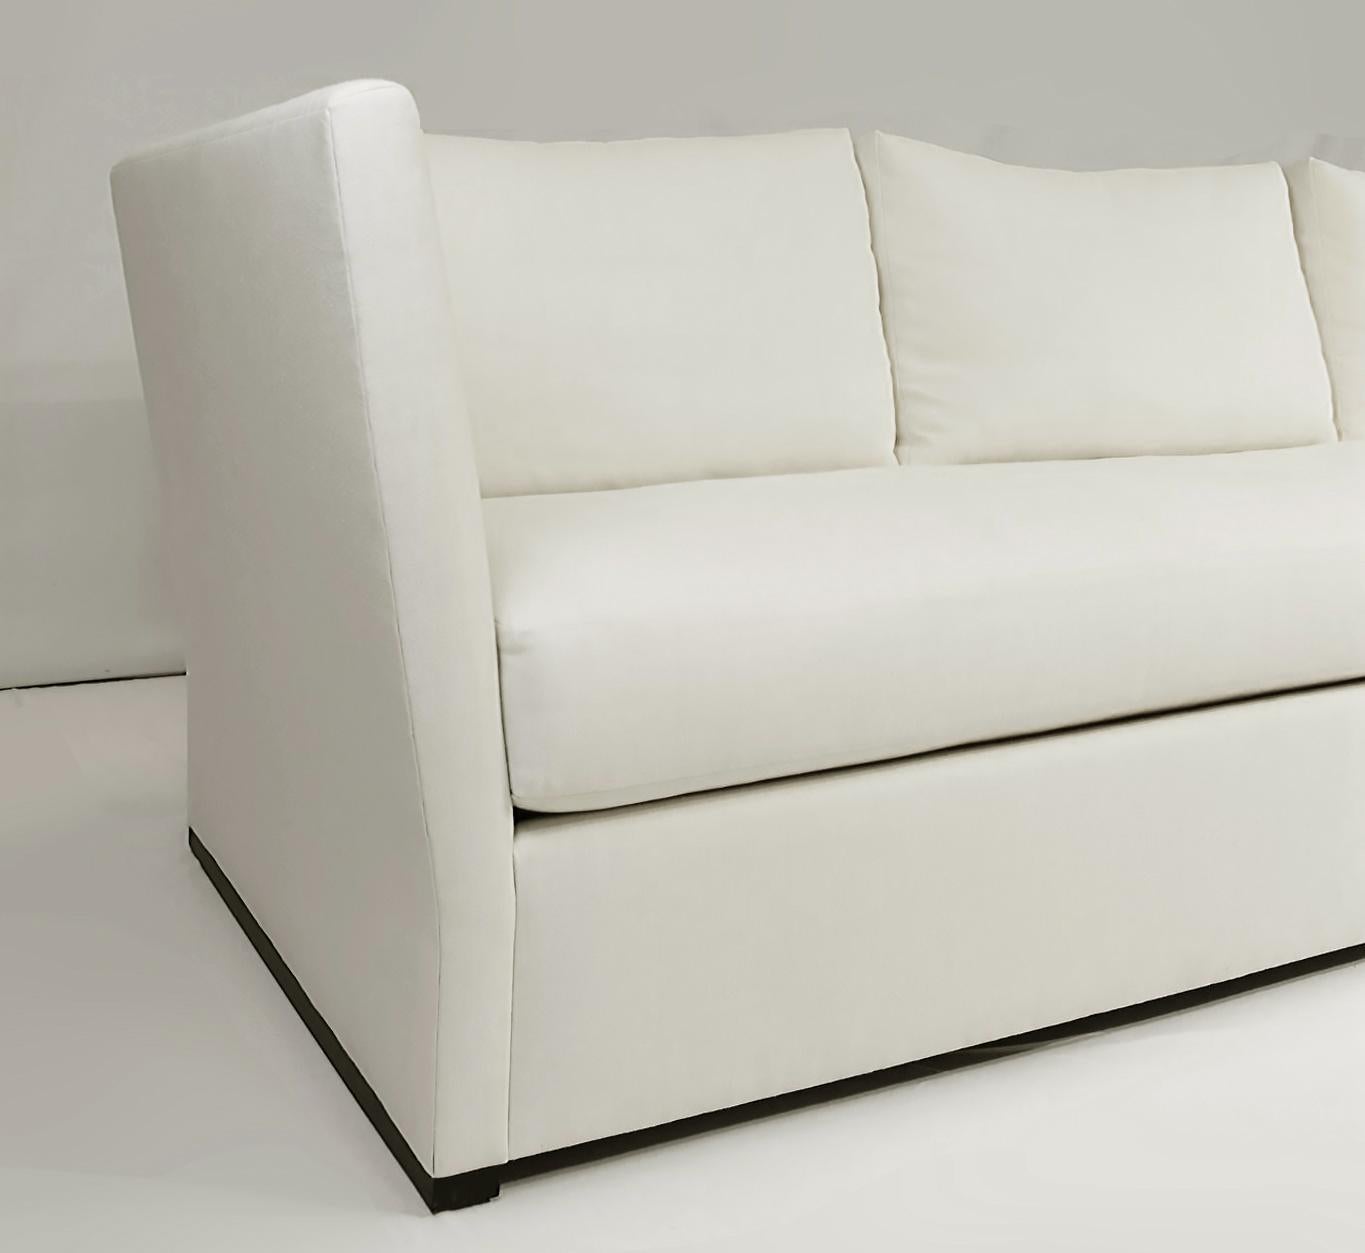 Le Jeune Upholstery Jones Angled Arm Sofa Showroom Model In Good Condition For Sale In Miami, FL